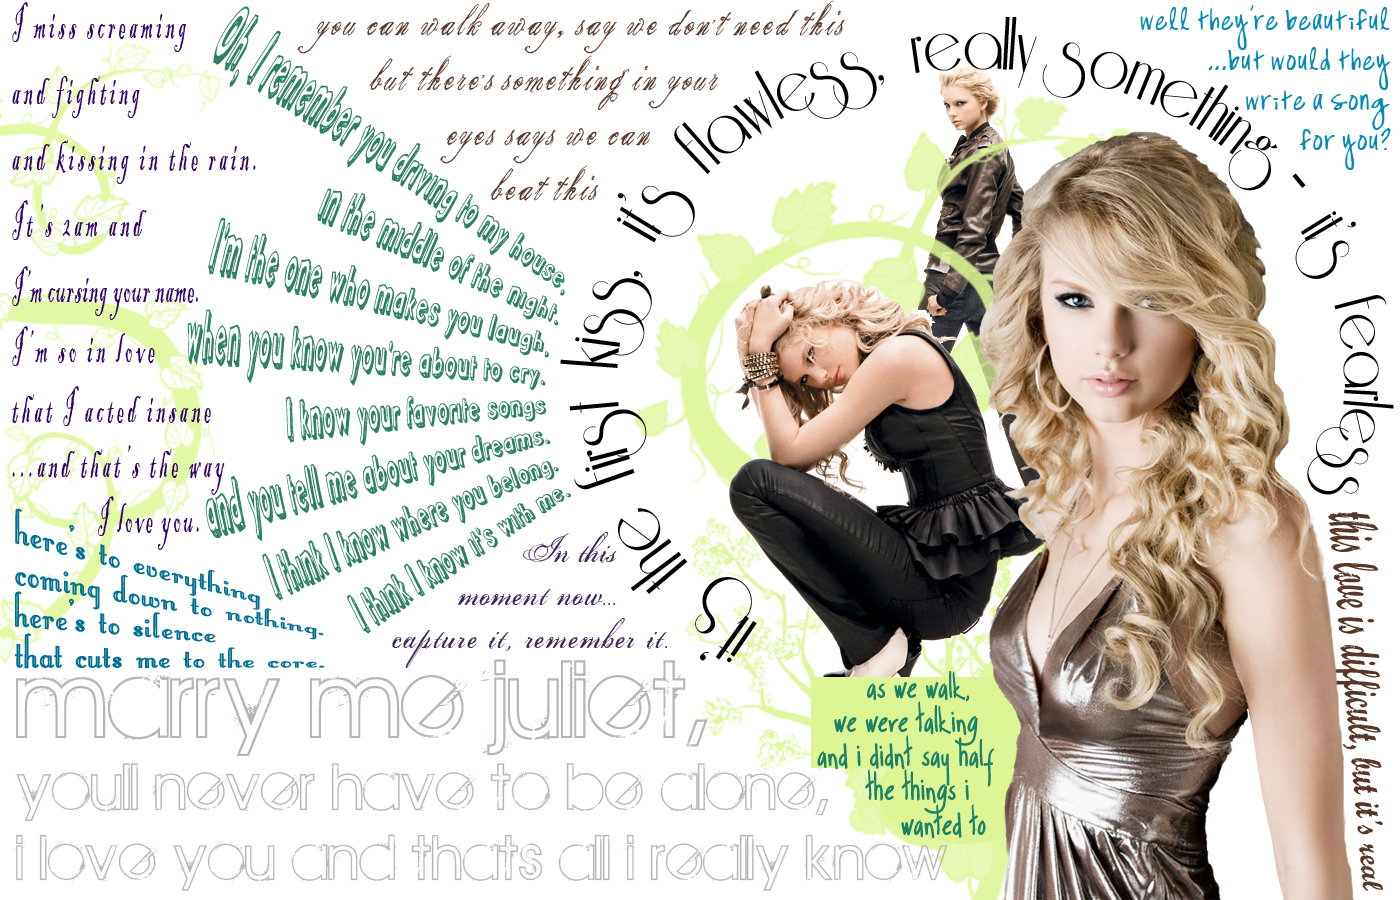 Taylor Swift Fearless by ANH and OFF